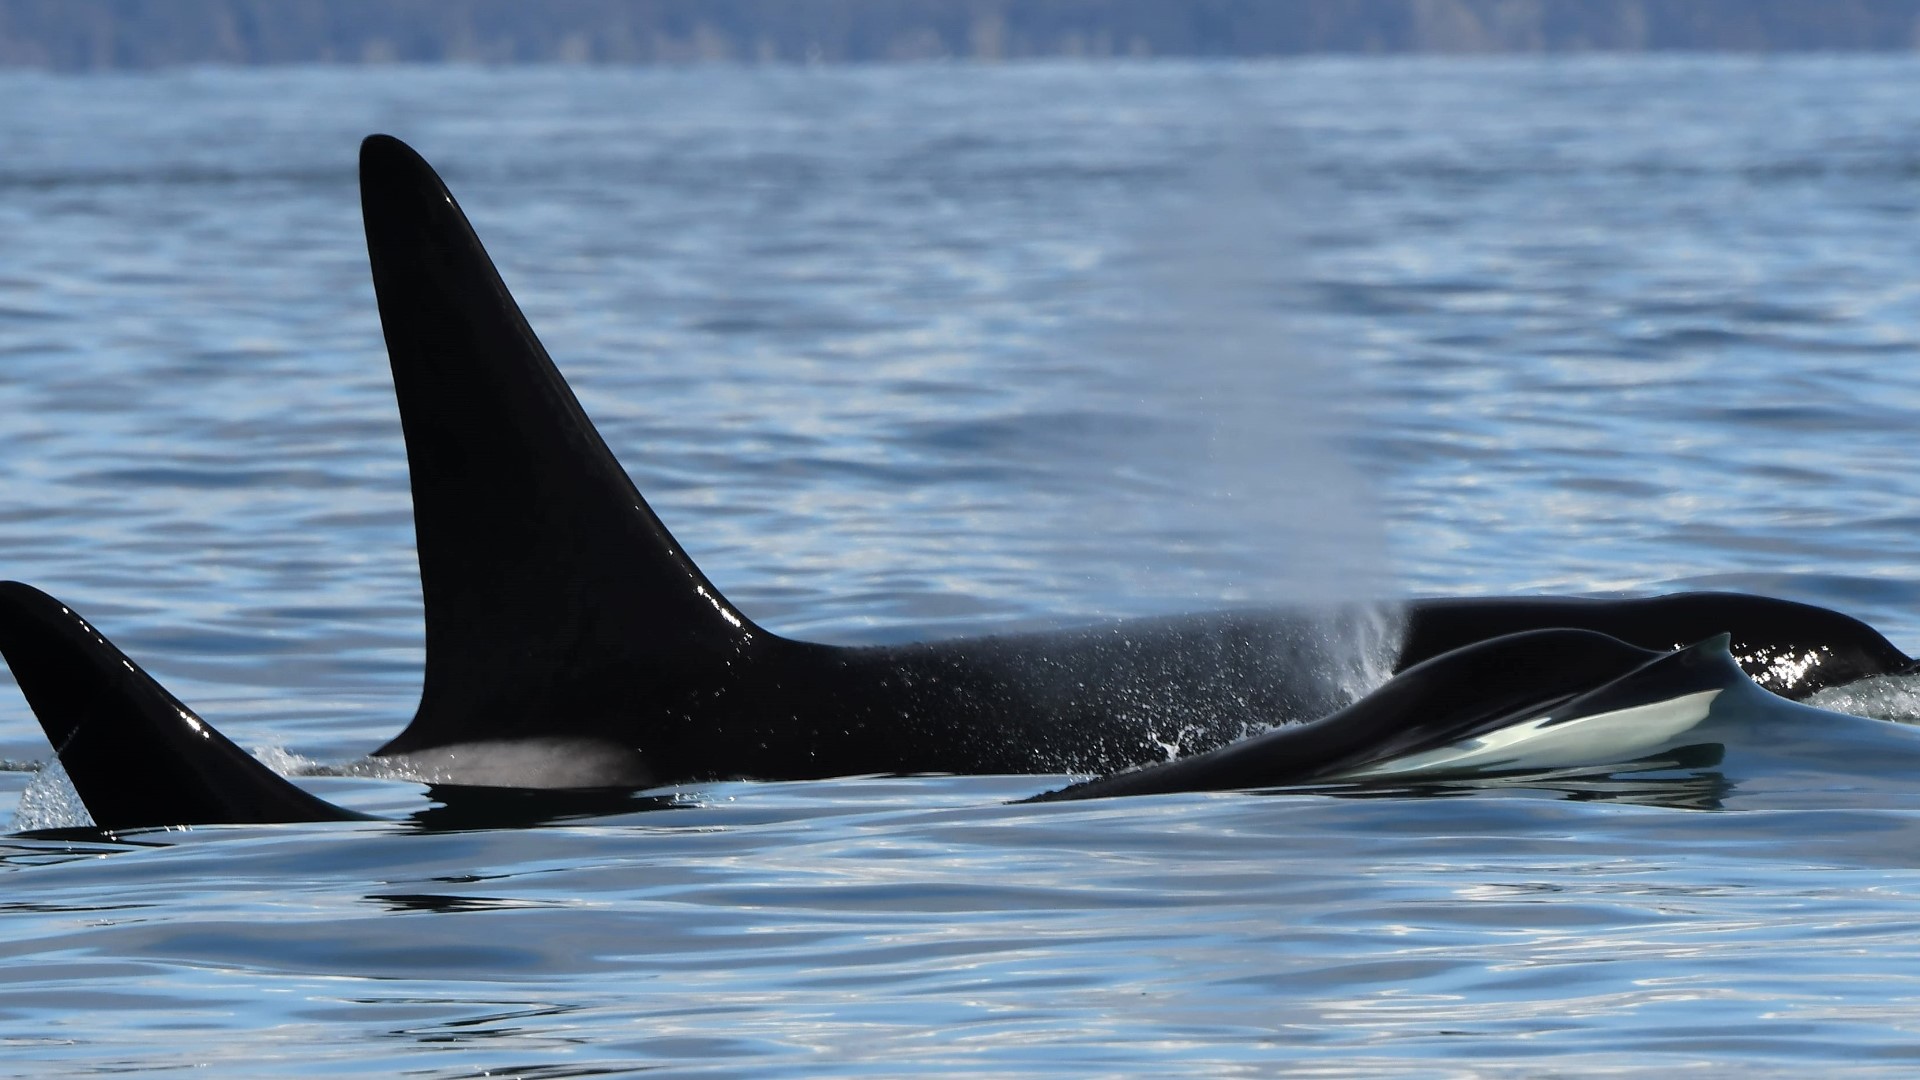 Bigg's killer whales and humpbacks were spotted in record-breaking numbers in 2022.